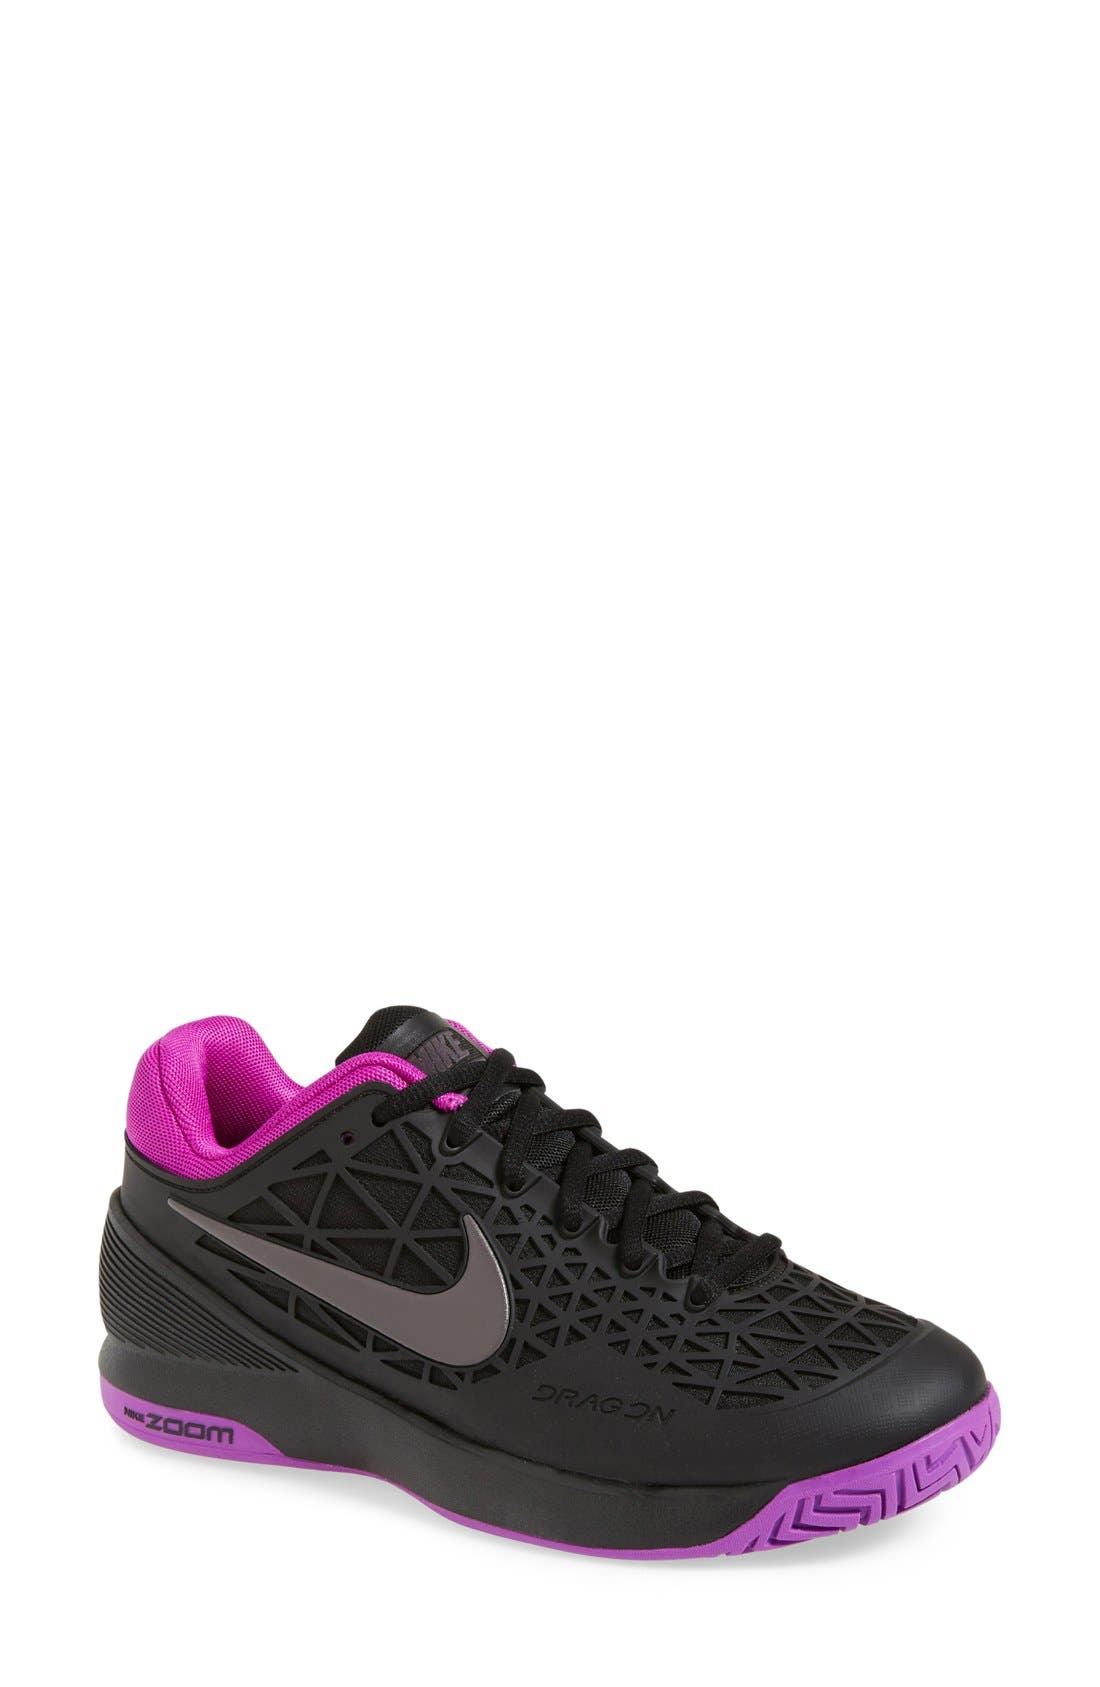 nike zoom cage 2 women's